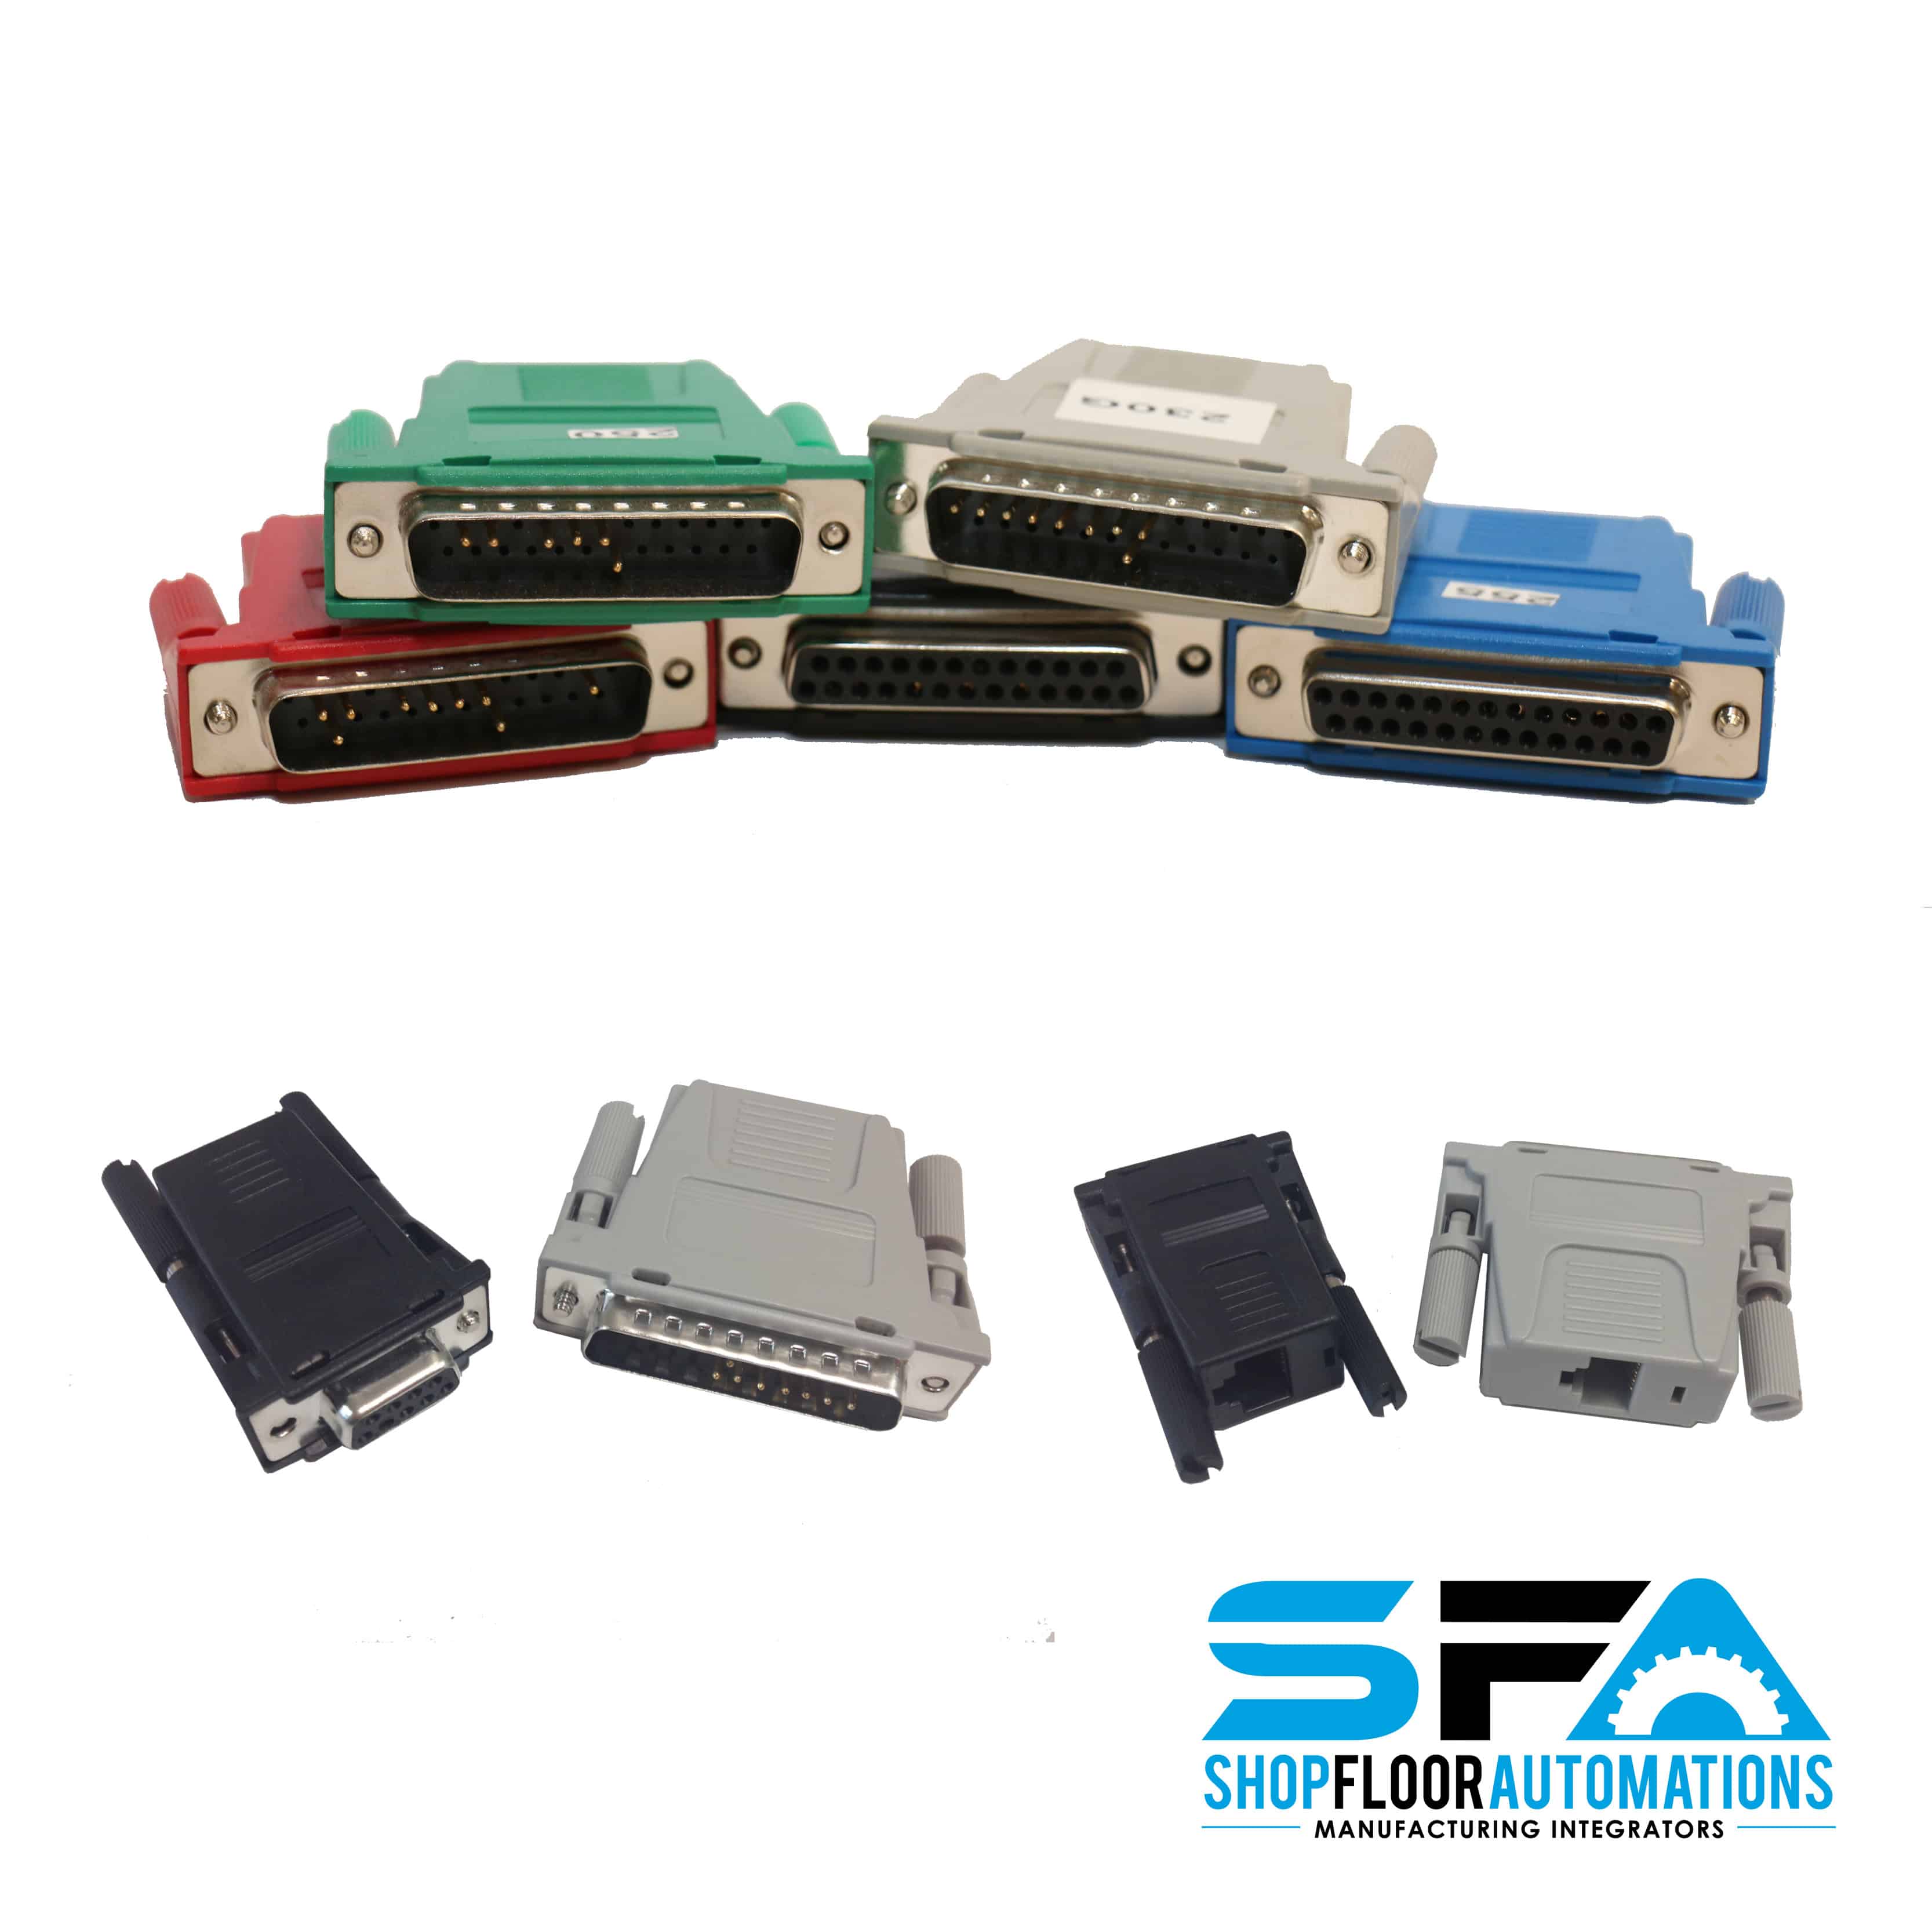 Multiple colors of RS232 Adapters are available.